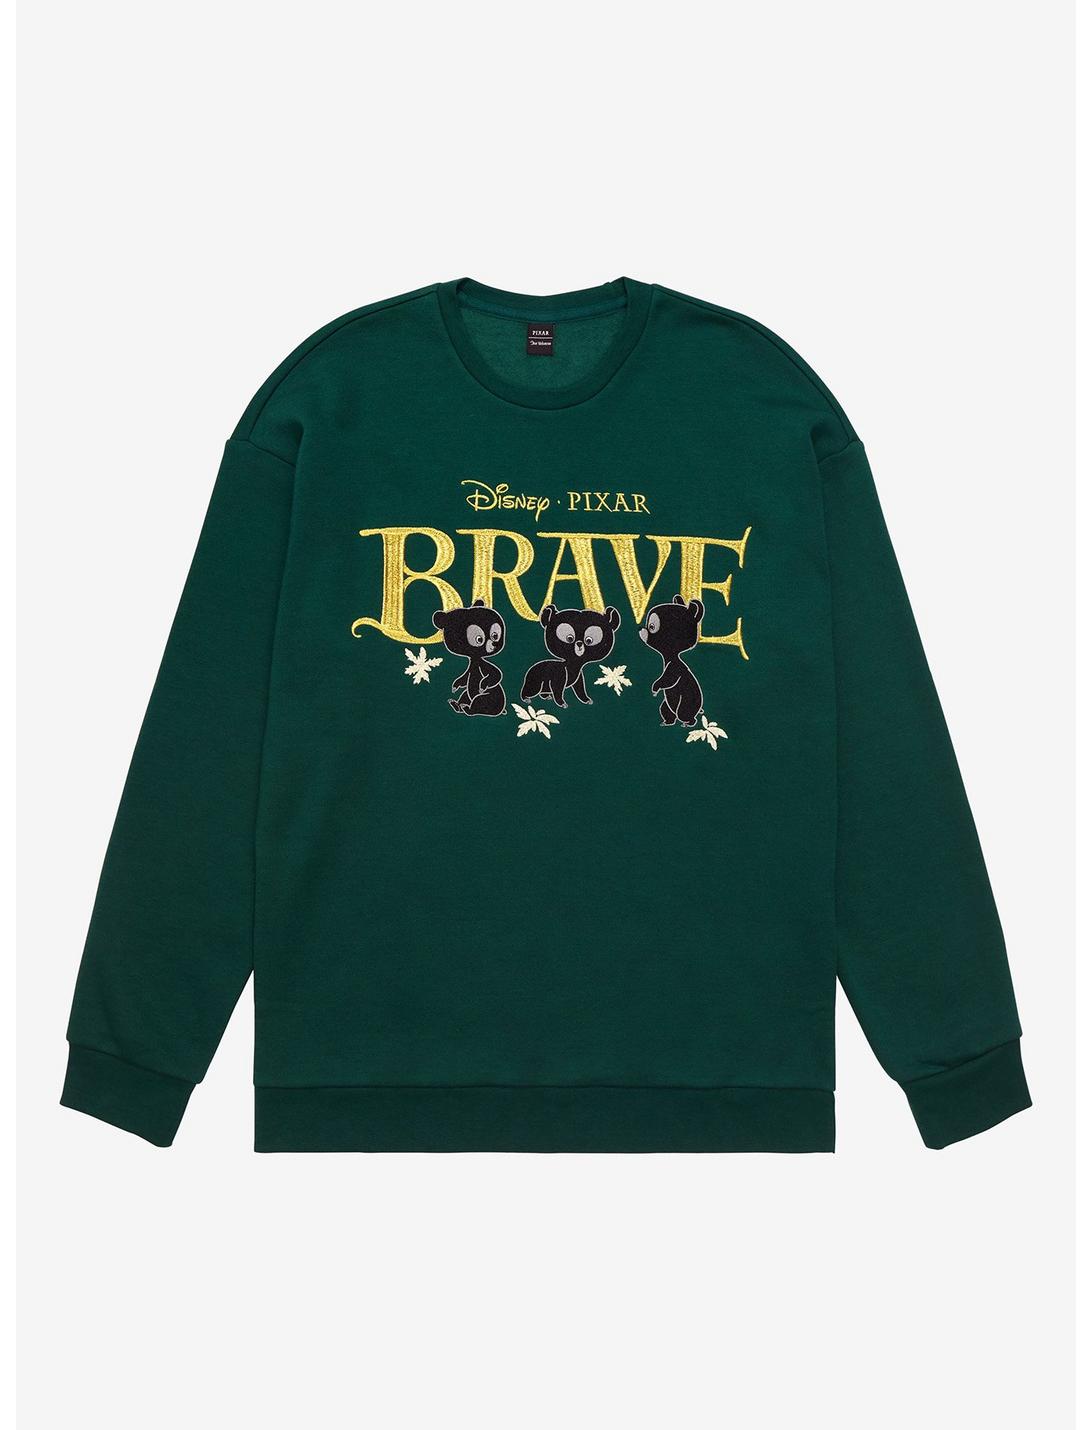 Our Universe Disney Pixar Brave Bear Brothers Crewneck - BoxLunch Exclusive, FOREST GREEN, hi-res